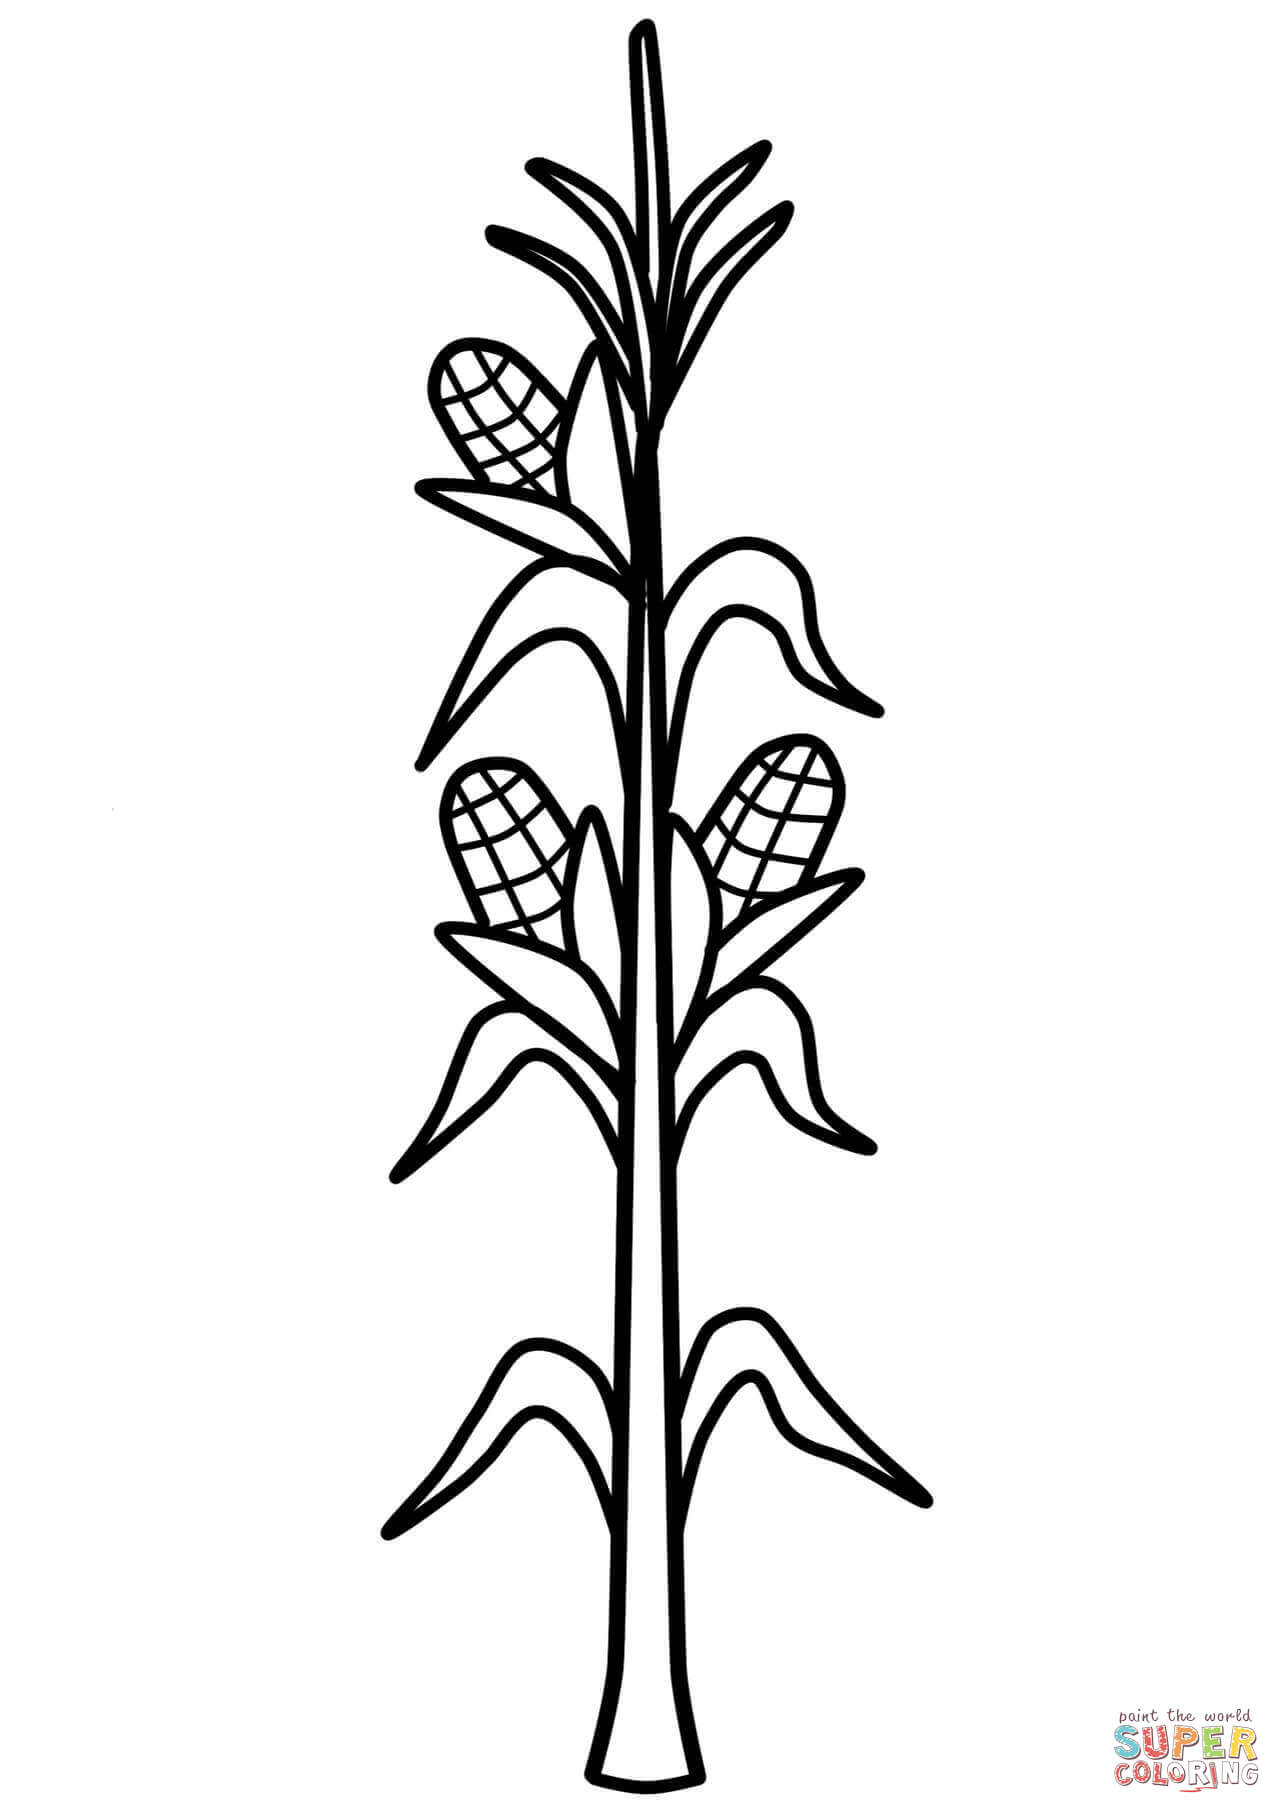 corn-on-the-cob-coloring-pages-coloring-home